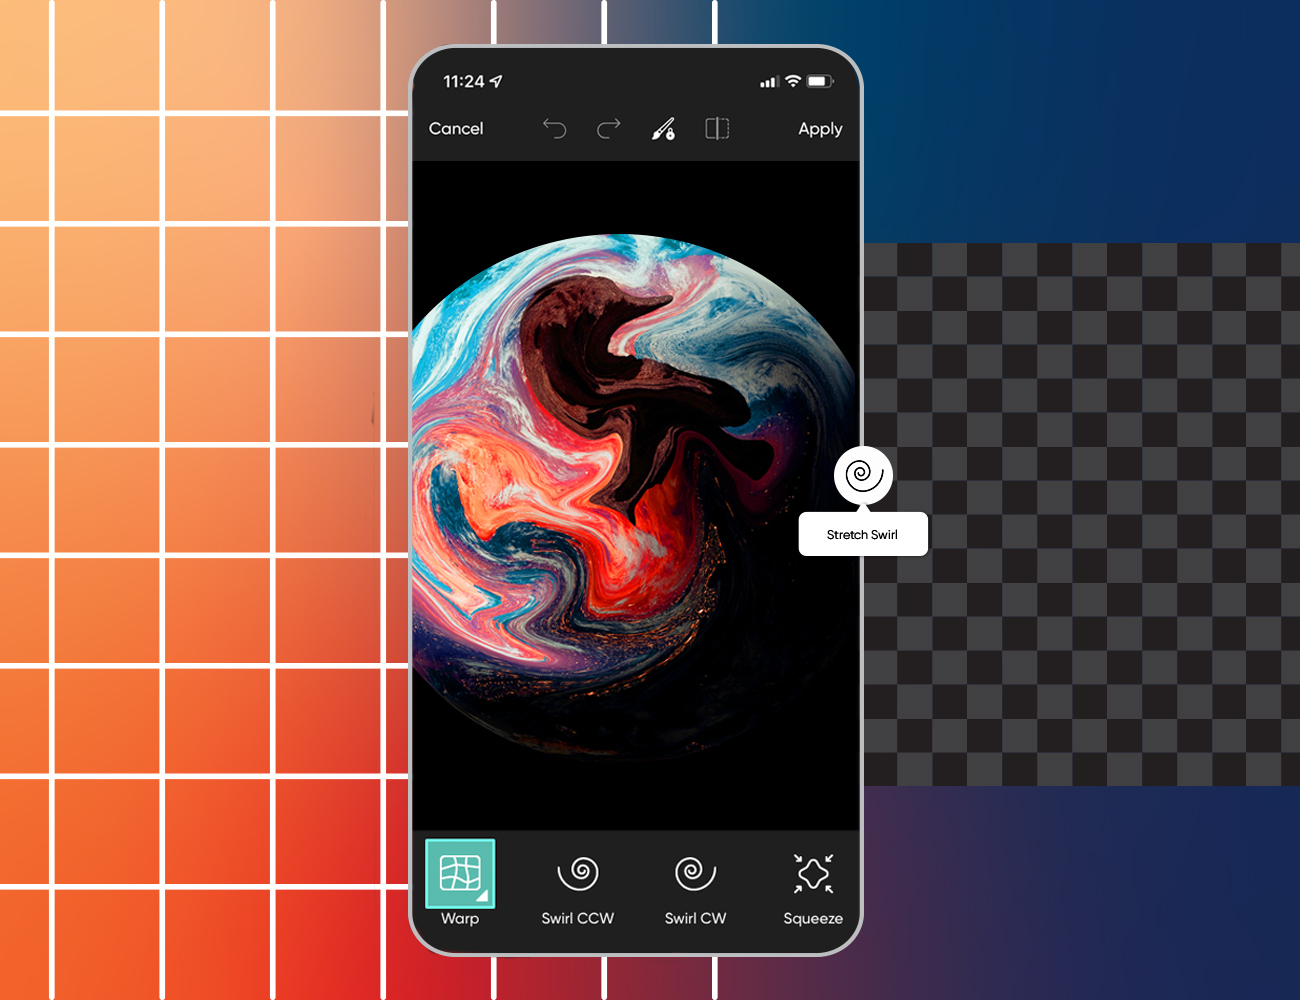 Create a Swirled Planet Wallpaper from Your Own Photo - Picsart Blog